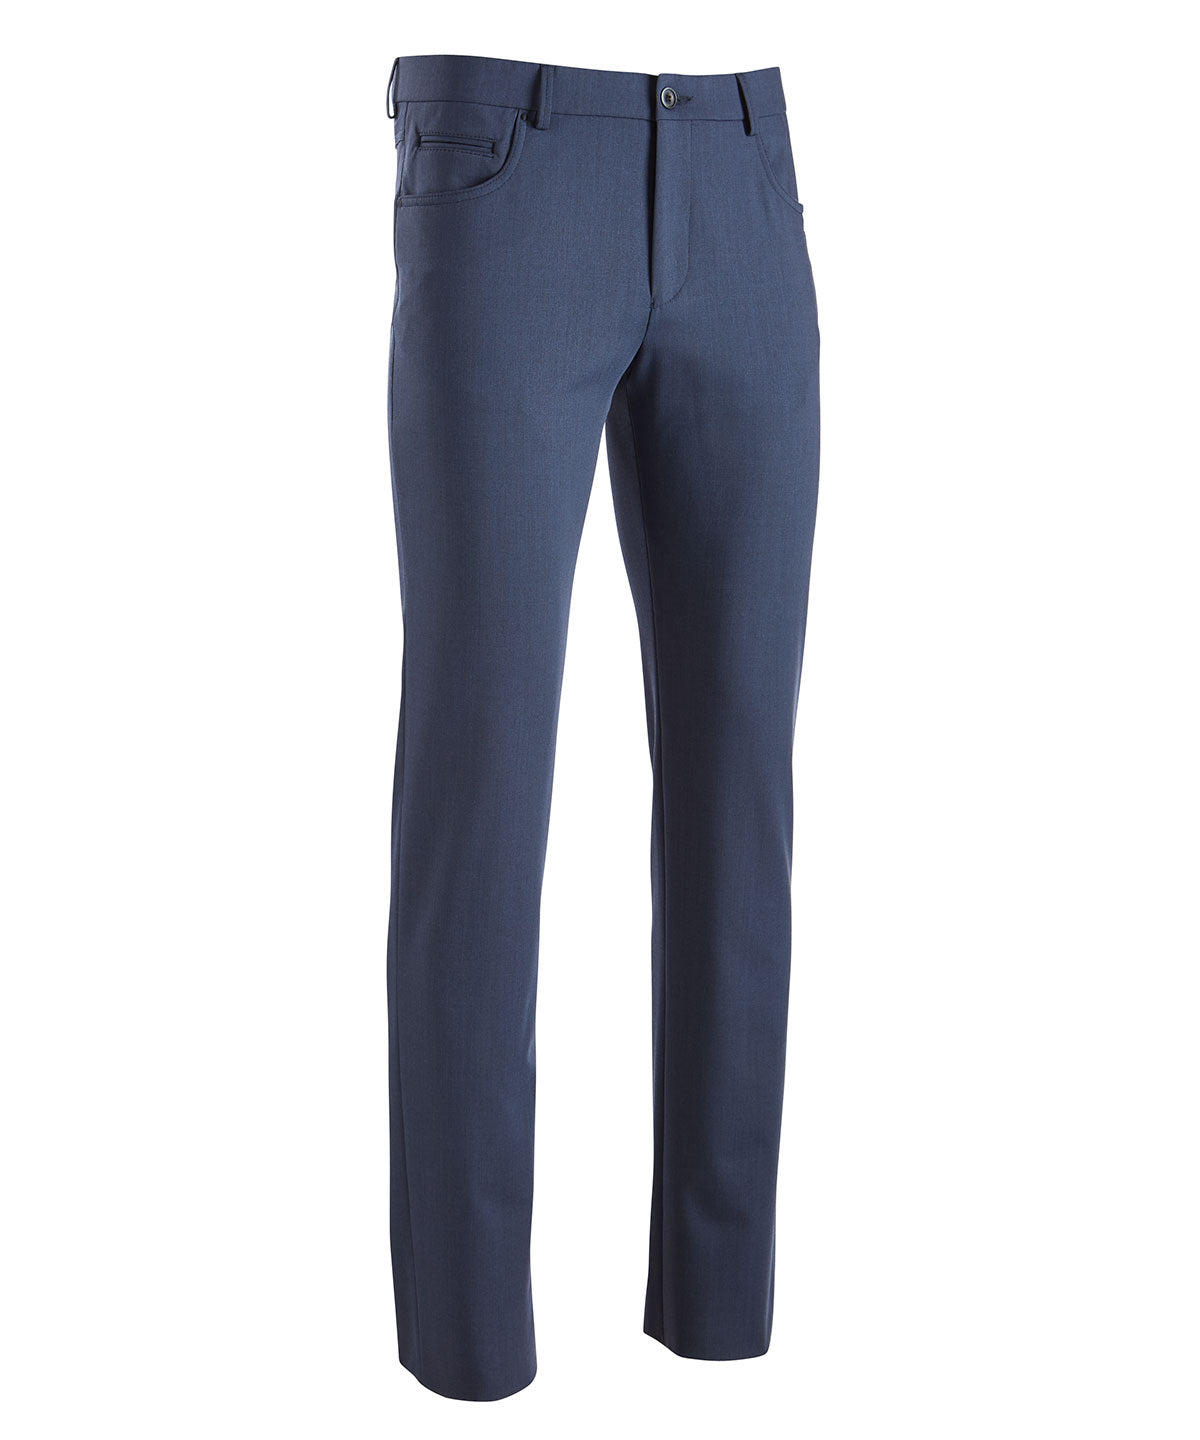 Shop Senior Men's Adaptive Pull-on Pant with Cargo Pockets Online